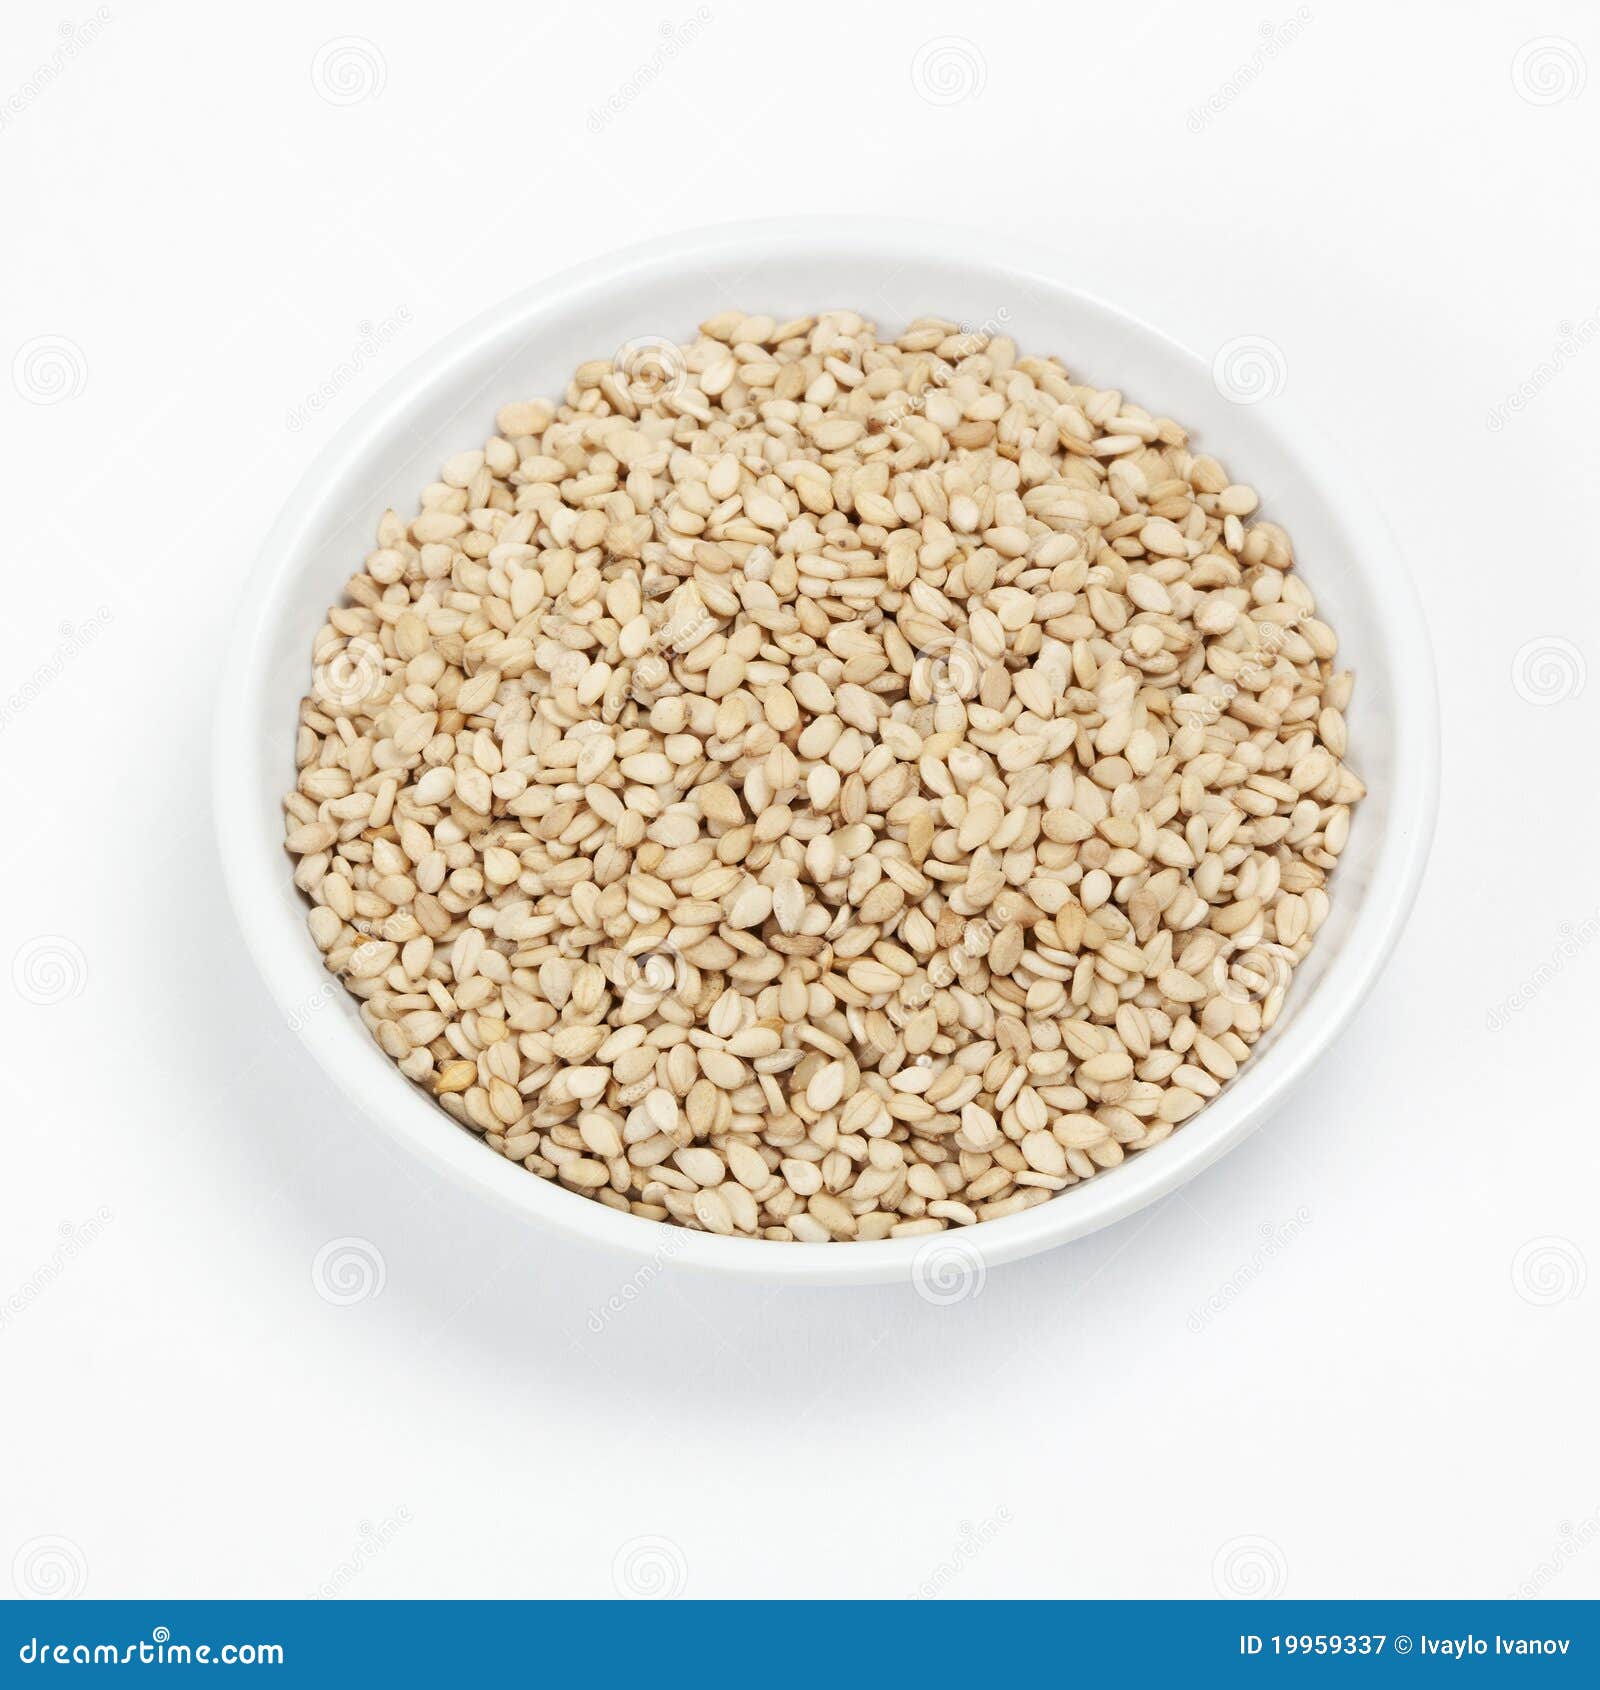 Bowl Of Sesame Seeds Royalty Free Stock Photography - Image: 19959337